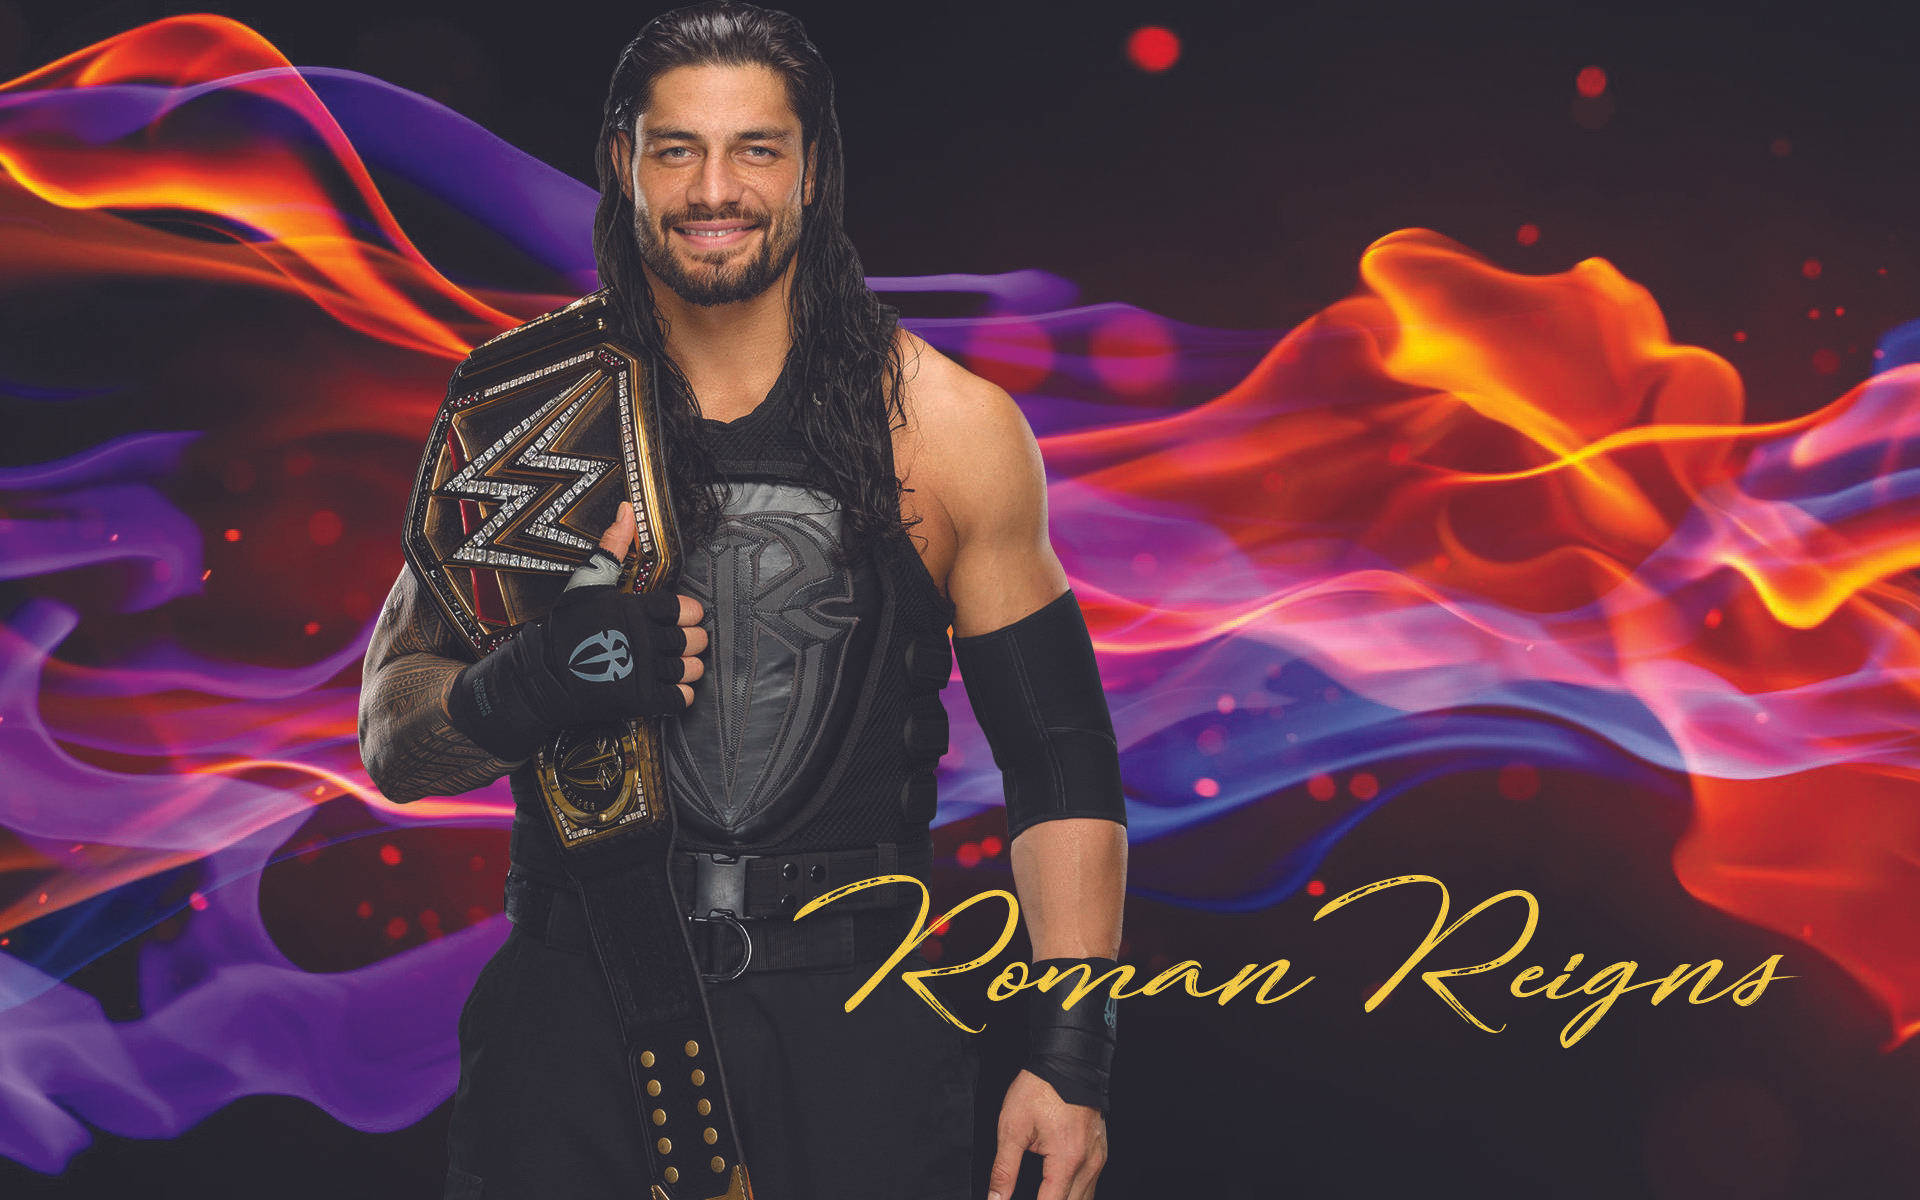 Top 999+ Roman Reigns Wallpaper Full HD, 4K✅Free to Use